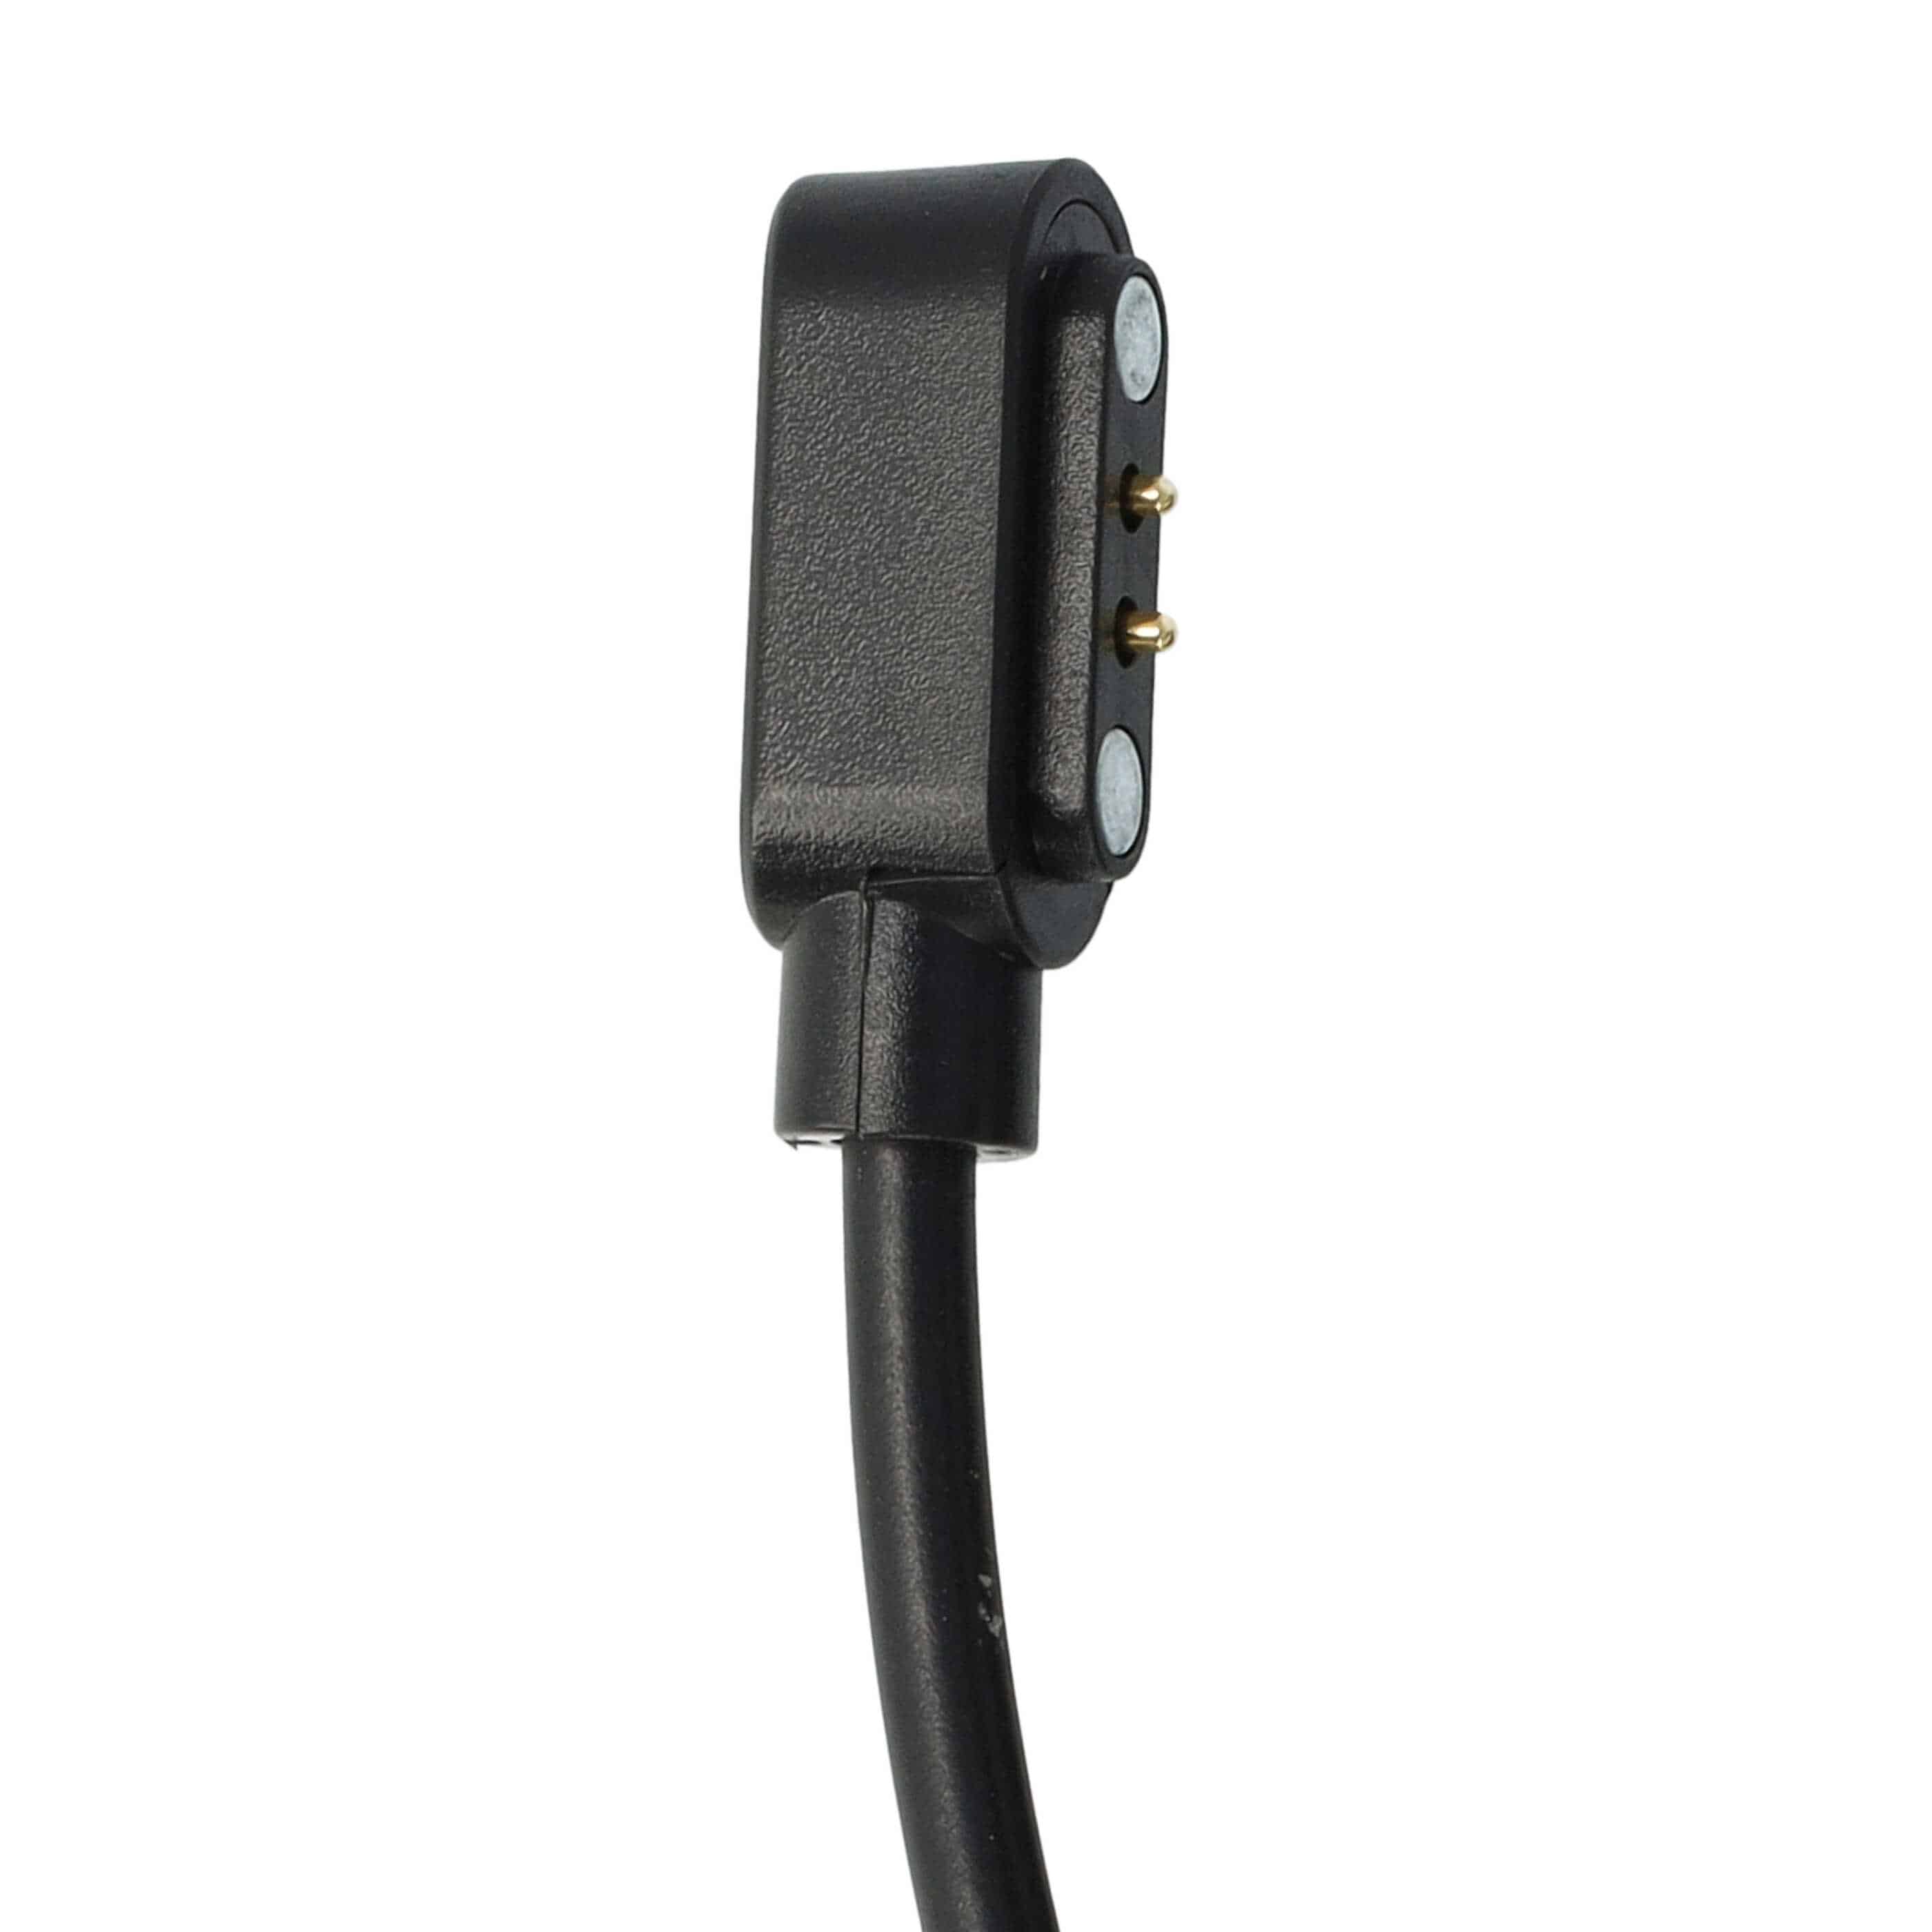 Charging Cable suitable for 3 Umidigi, Willful 3 Fitness Tracker etc. - USB A Cable, 100cm, black